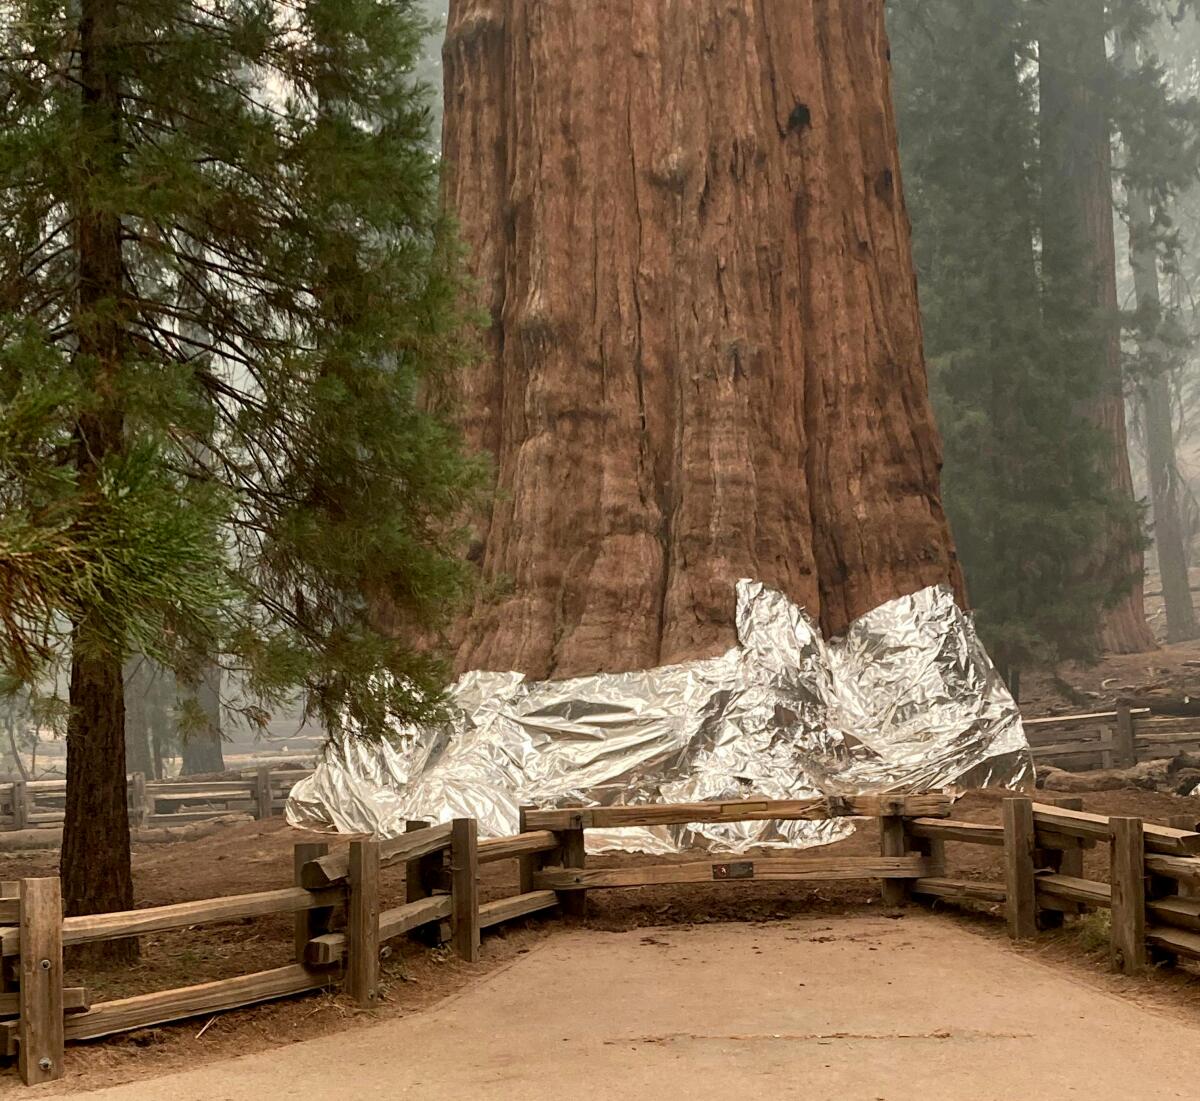 The General Sherman tree in the Giant Forest of Sequoia National Park is wrapped in fire-resistant material.